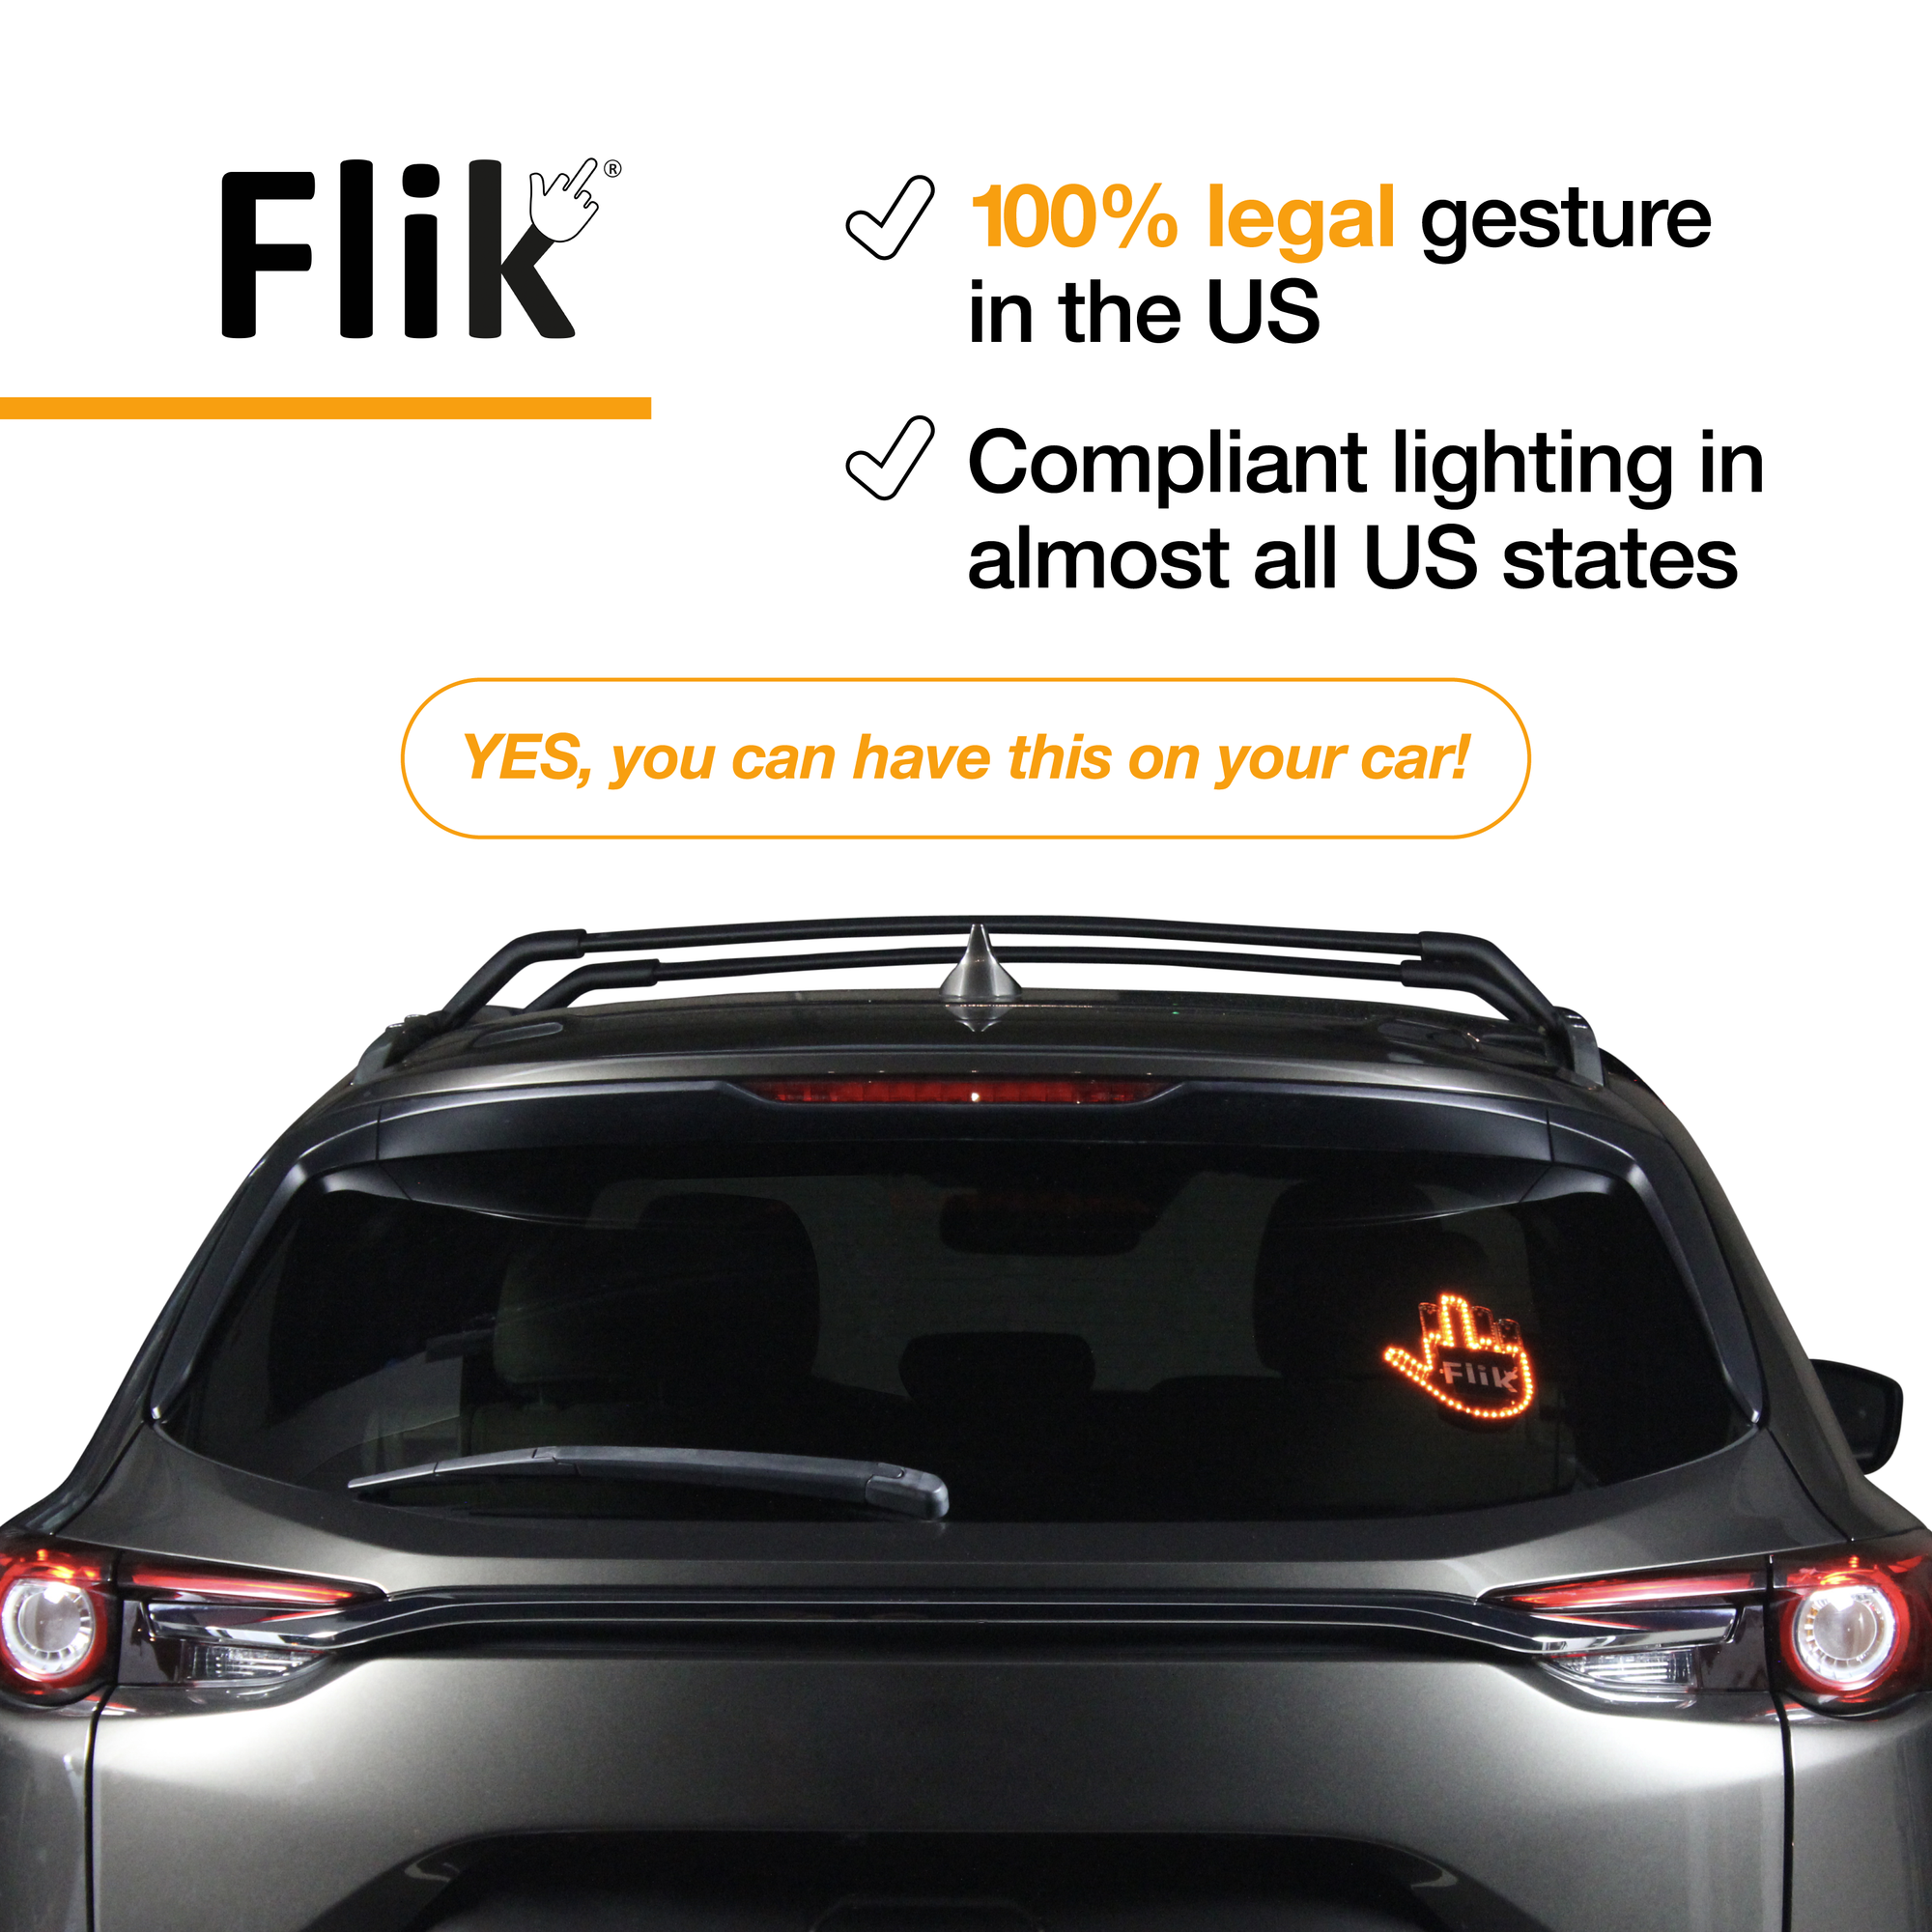 Flik Original Middle Finger Light - Give The Bird & Wave to Drivers - hottest Gifted Car Accessories Truck Accessories Car Gadgets & Road Rage